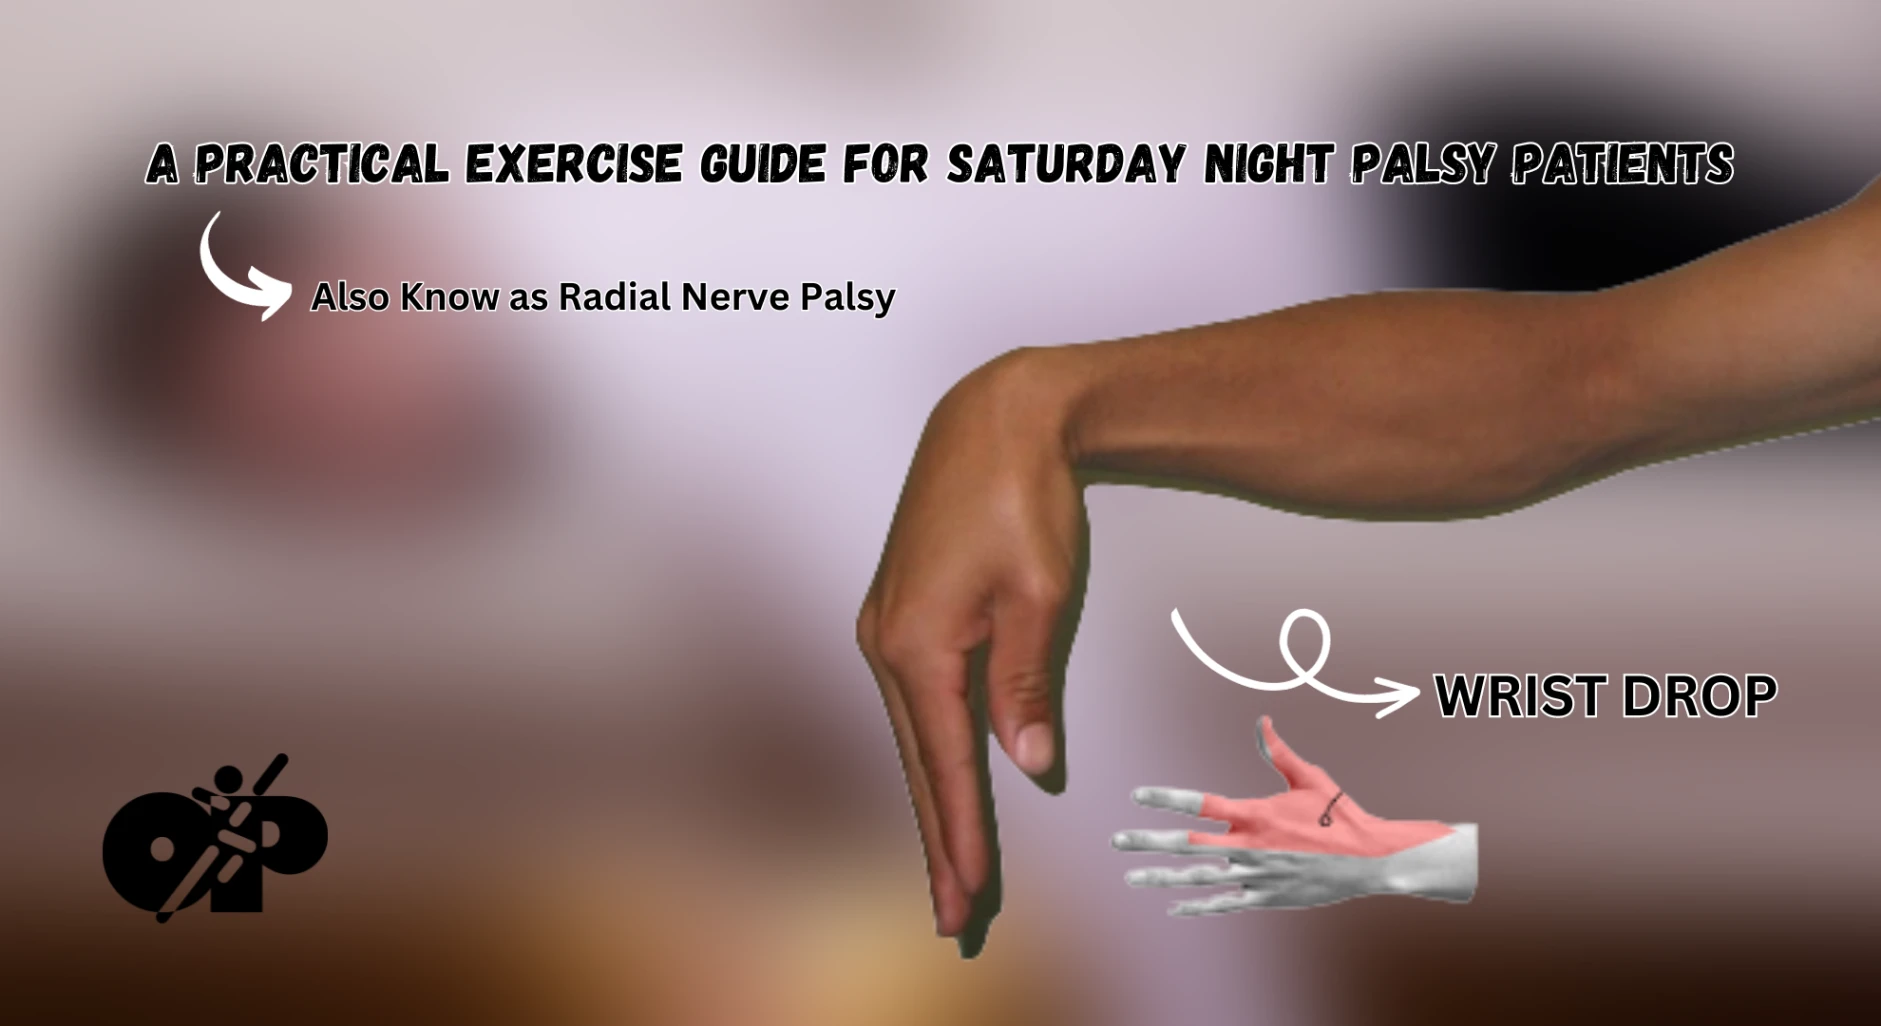 39. A Practical Exercise Guide for Saturday Night Palsy Patients